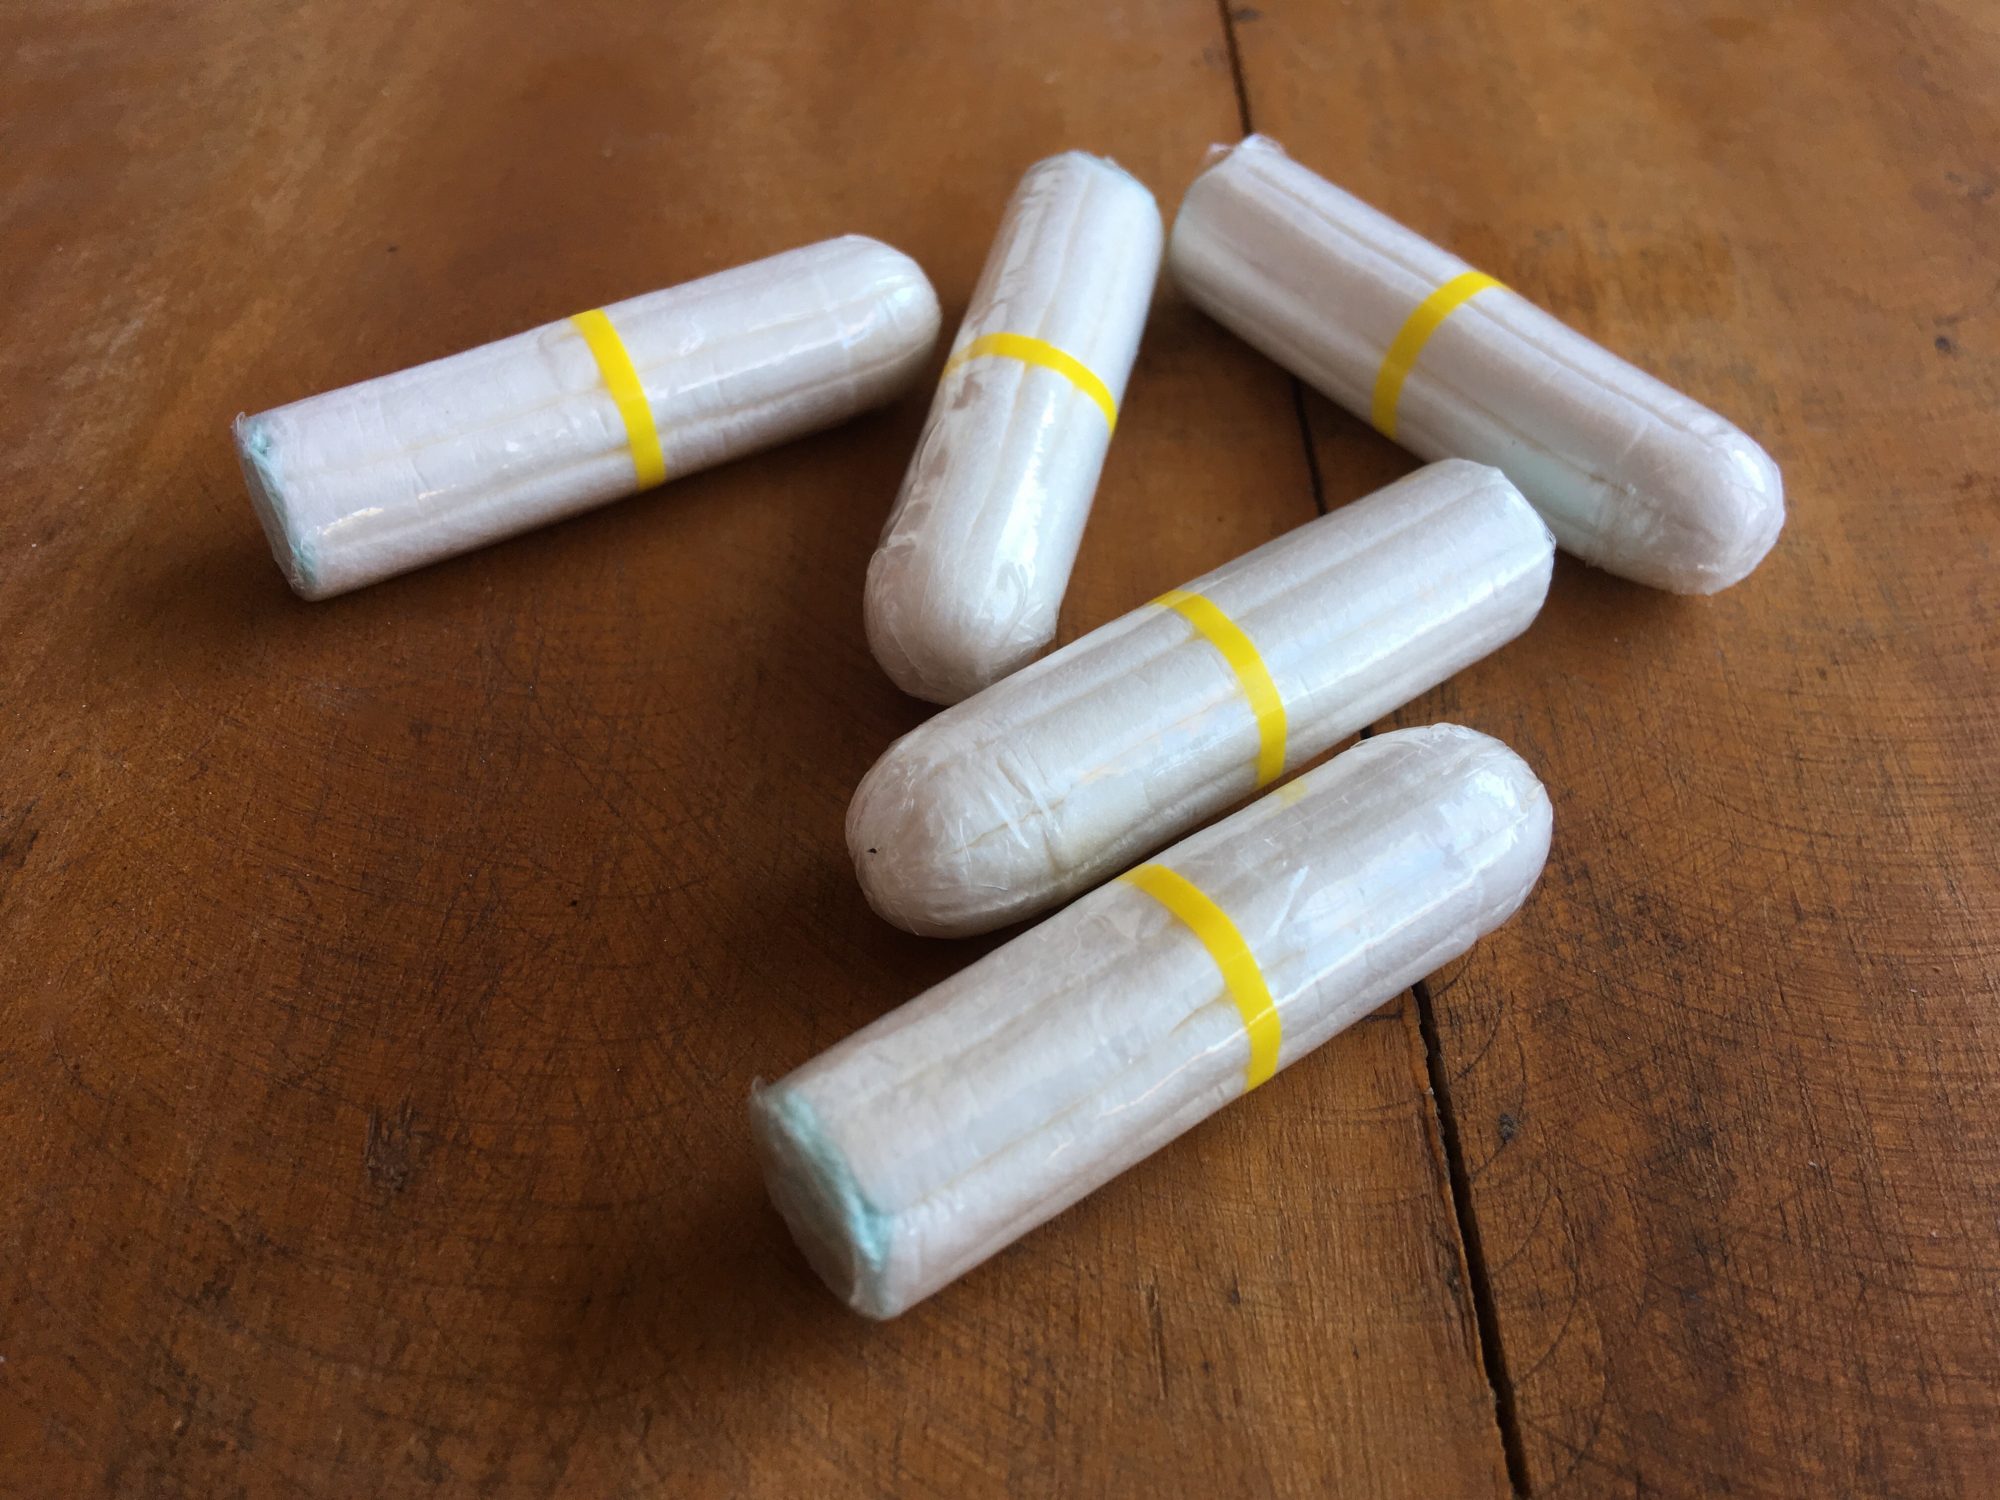 Tampons-on-a-table.jpg